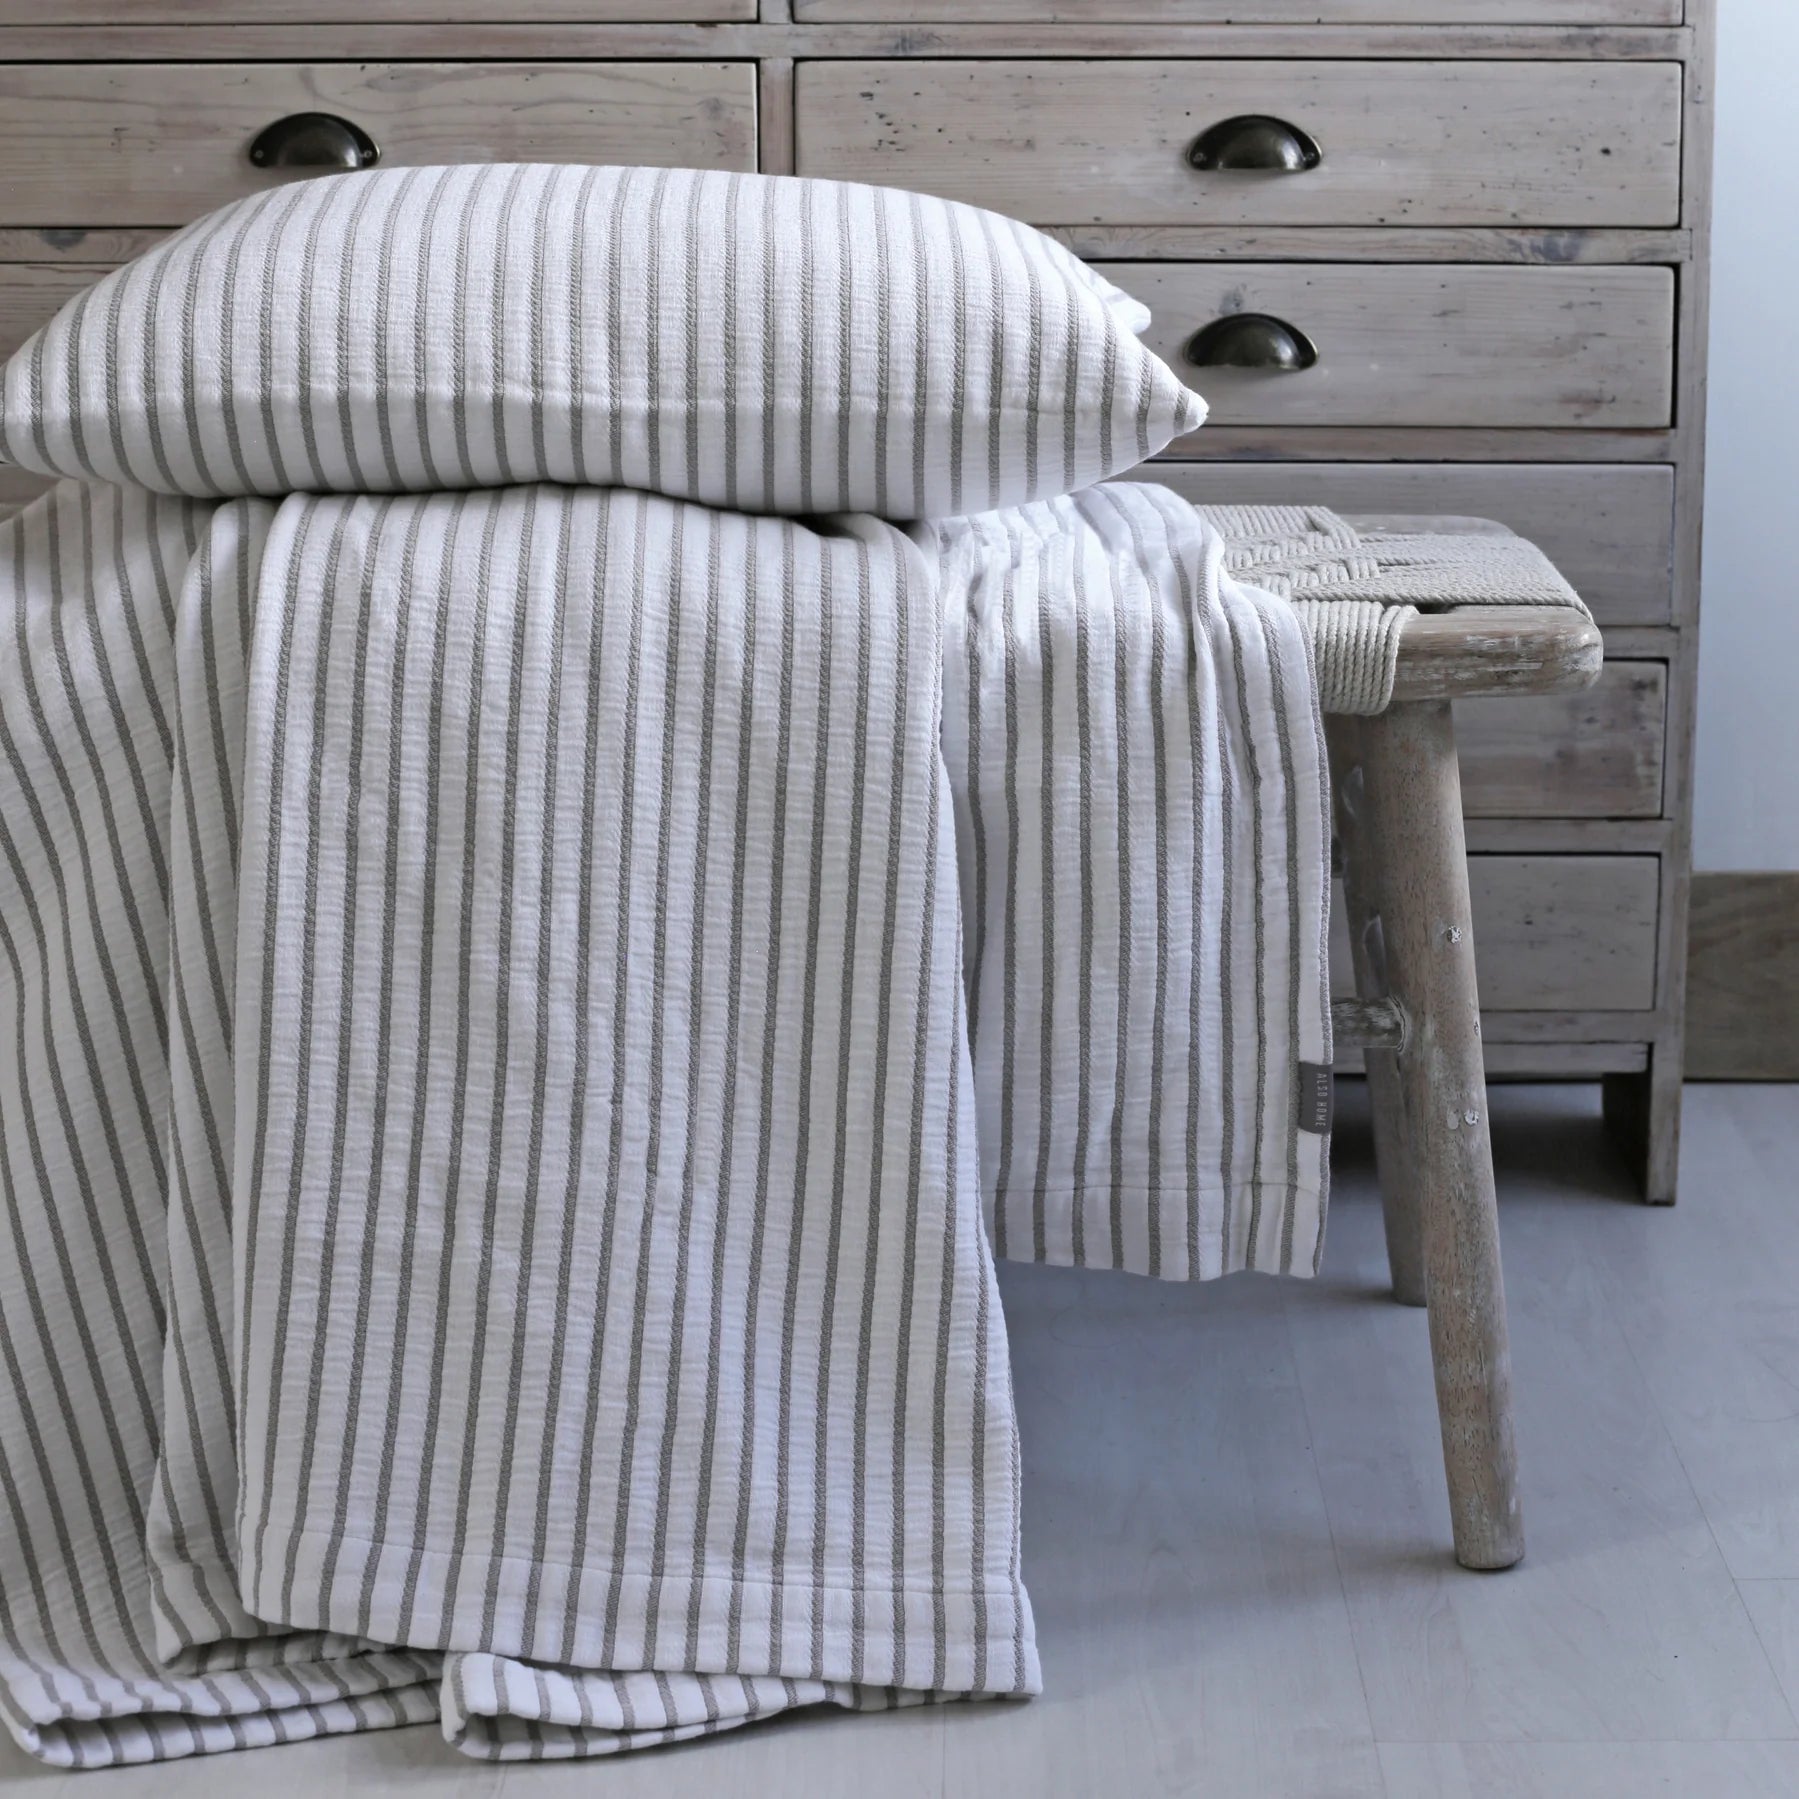 A Striped Cotton Throw Blanket and cushion on a woven bench.